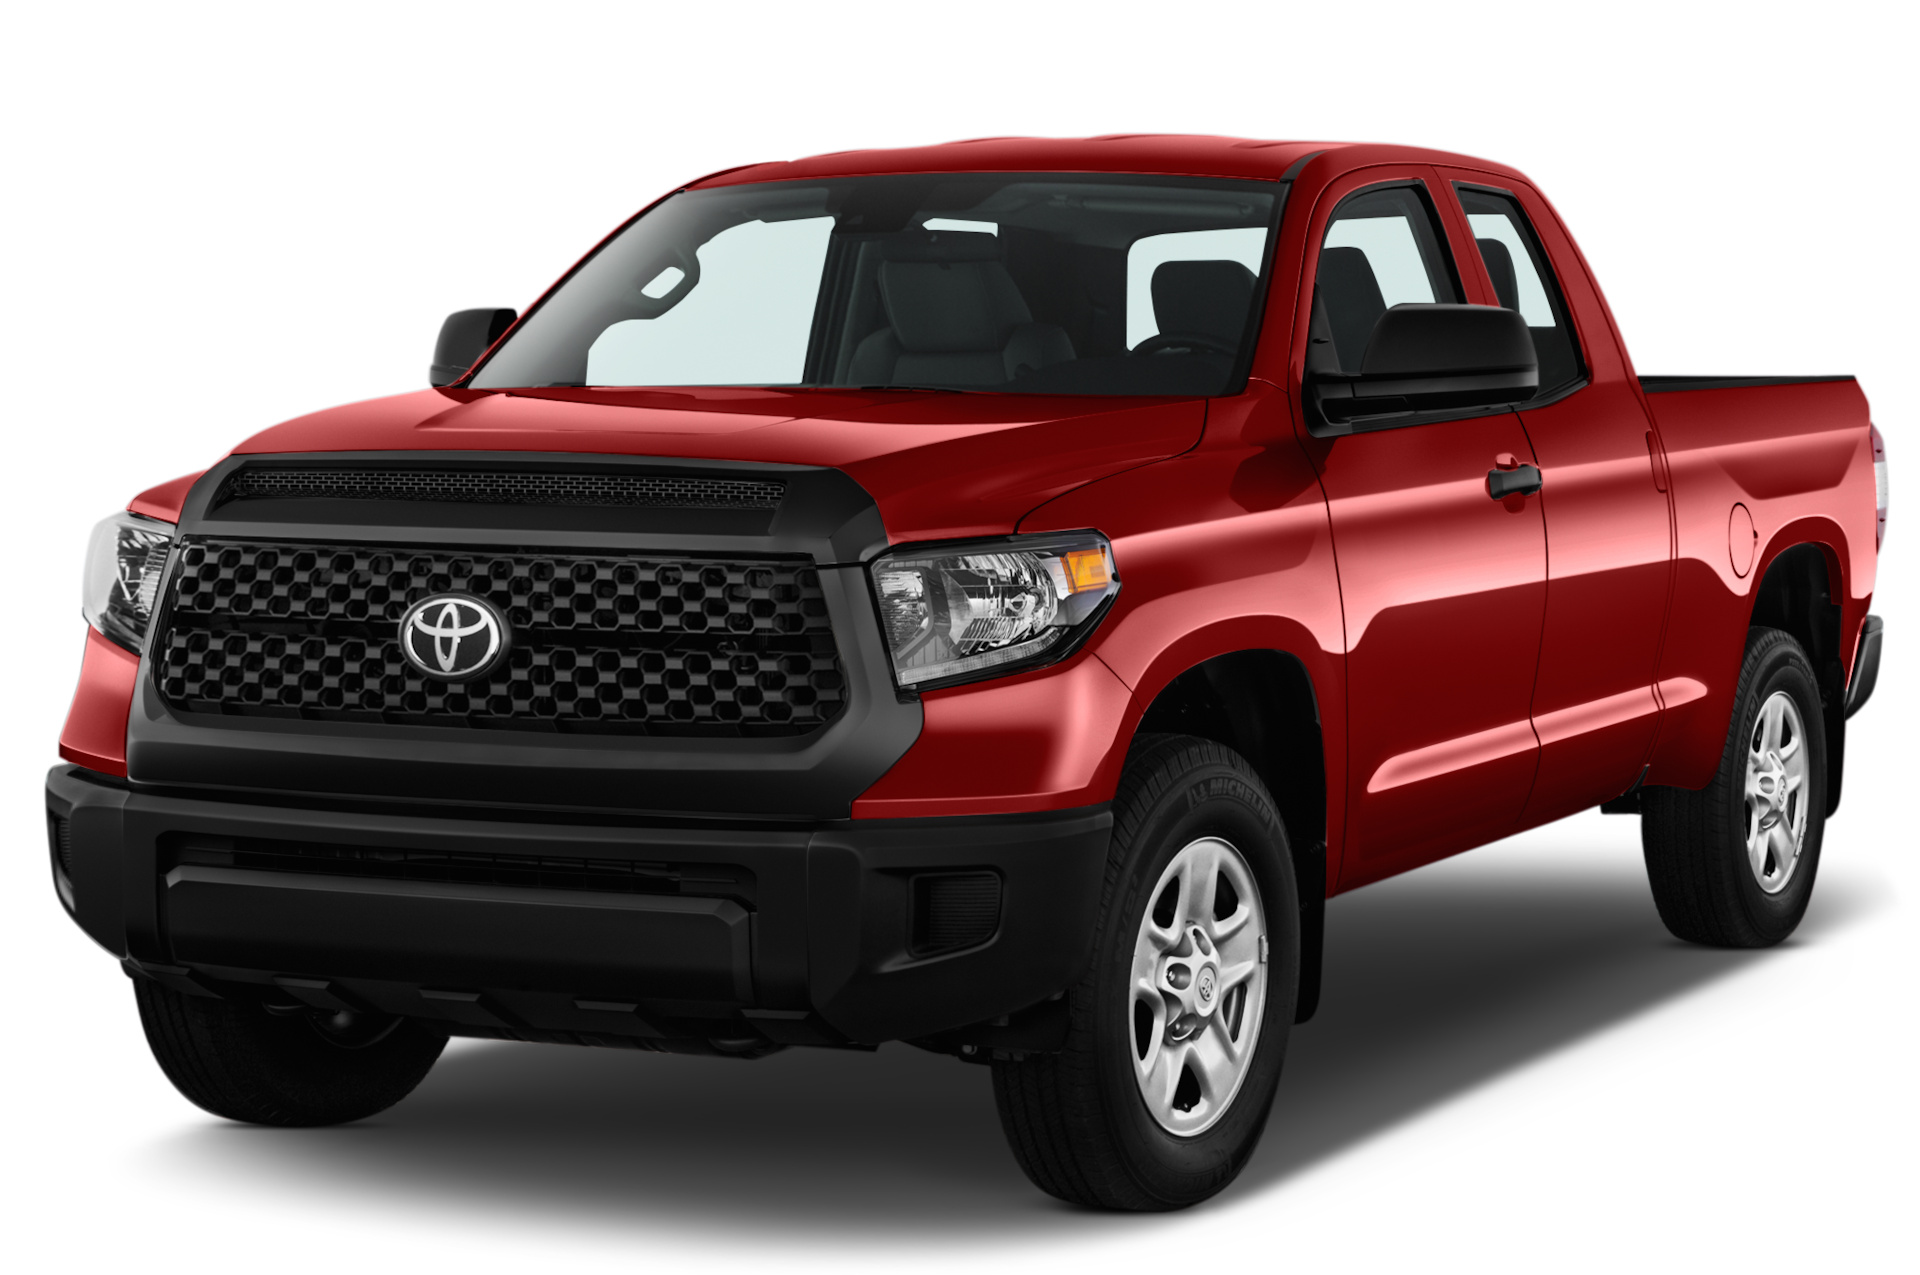 Toyota Tundra, Exceptional durability, Unbeatable reliability, In-depth reviews, 1920x1280 HD Desktop